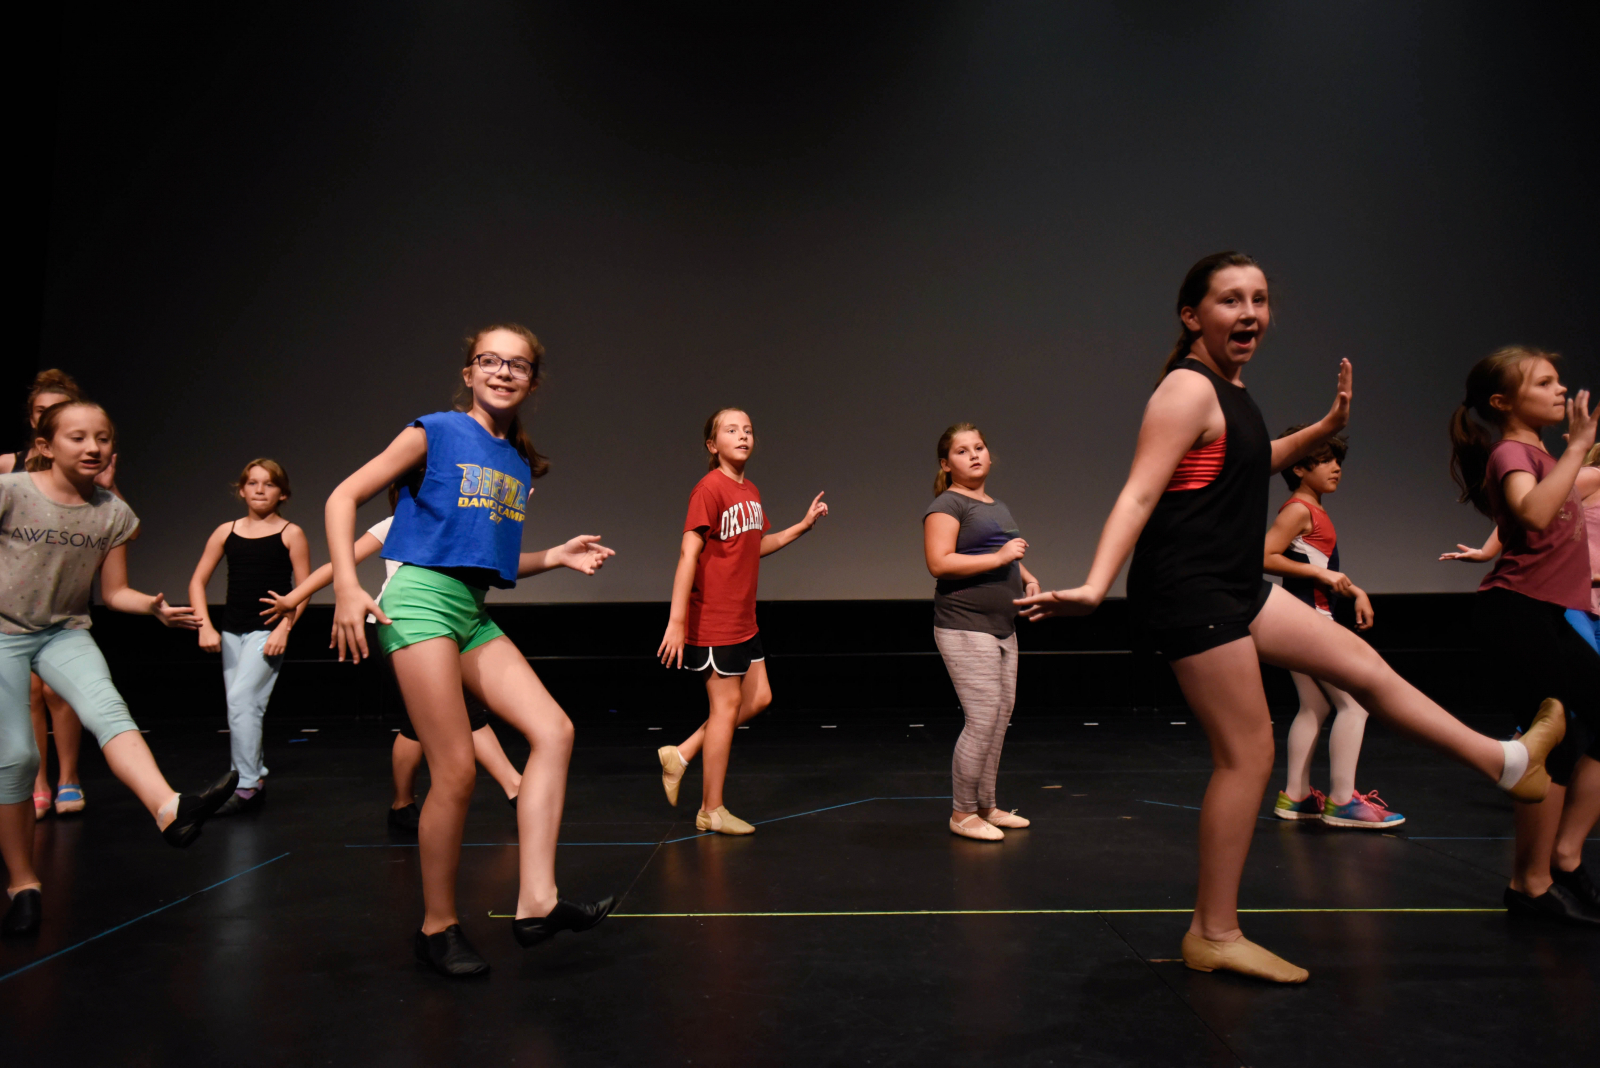 Students from the Broadway Dance Summer Education Program learn choreography in the GE Theatre at Proctors Tuesday, July 25, 2017.